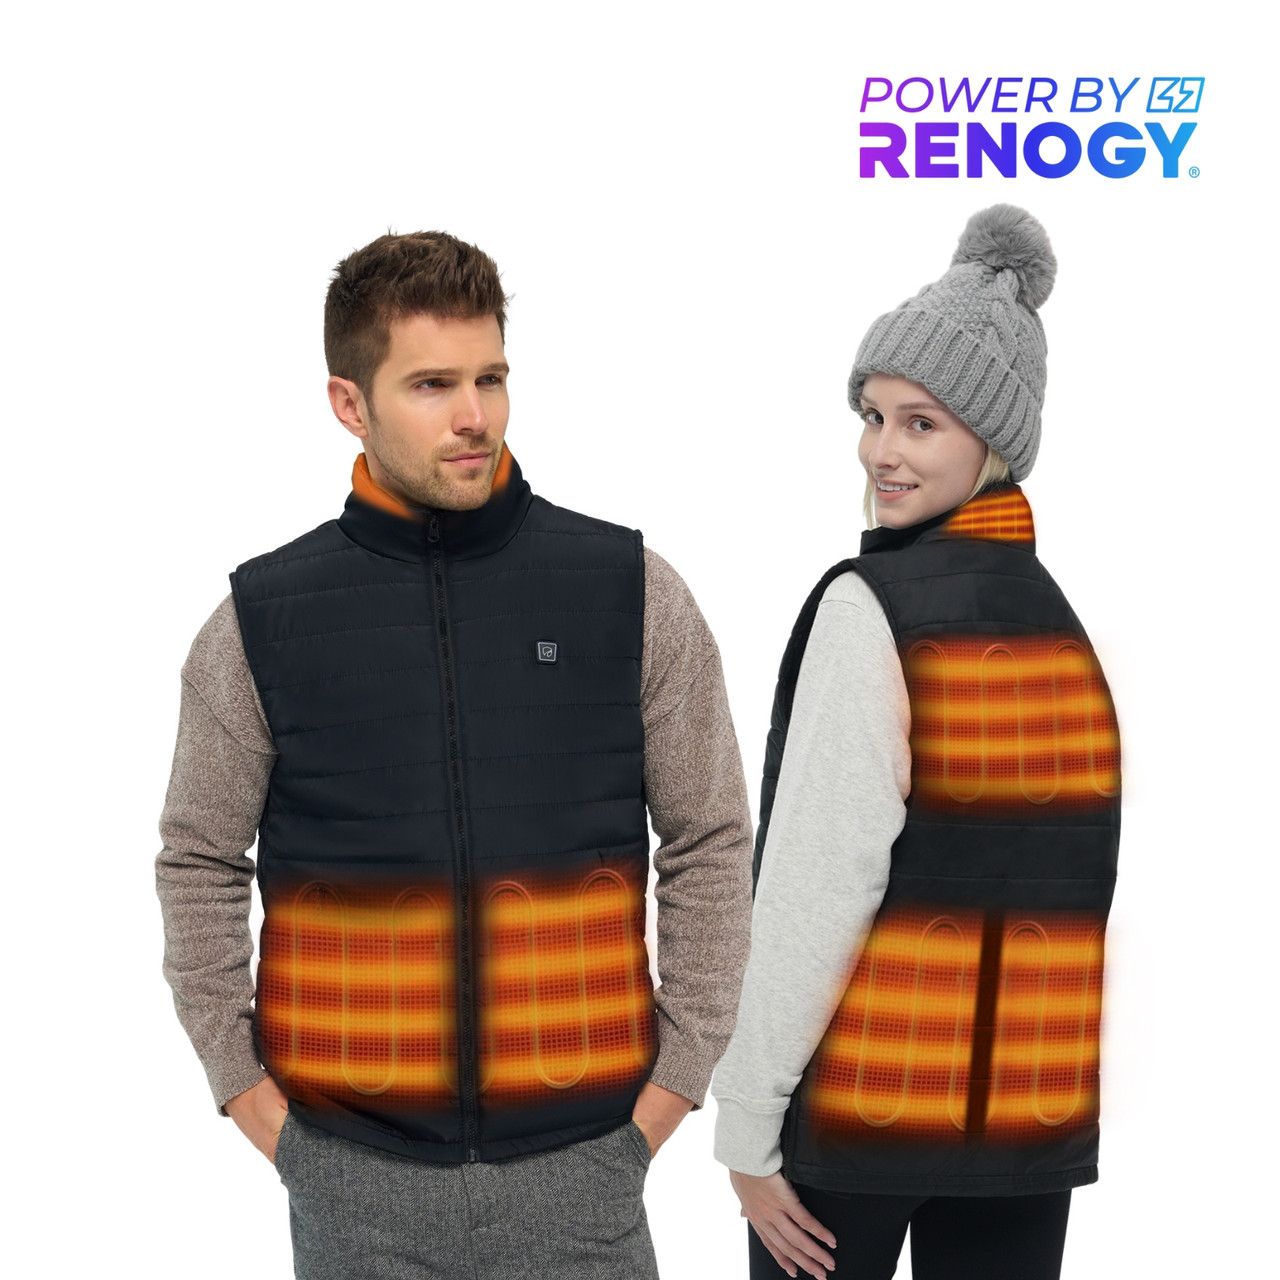 https://cdn11.bigcommerce.com/s-fhnch/images/stencil/1280x1280/products/2077/26327/1._Dr.Prepare_unisex_heated_vest__22626.1700555131.jpg?c=2